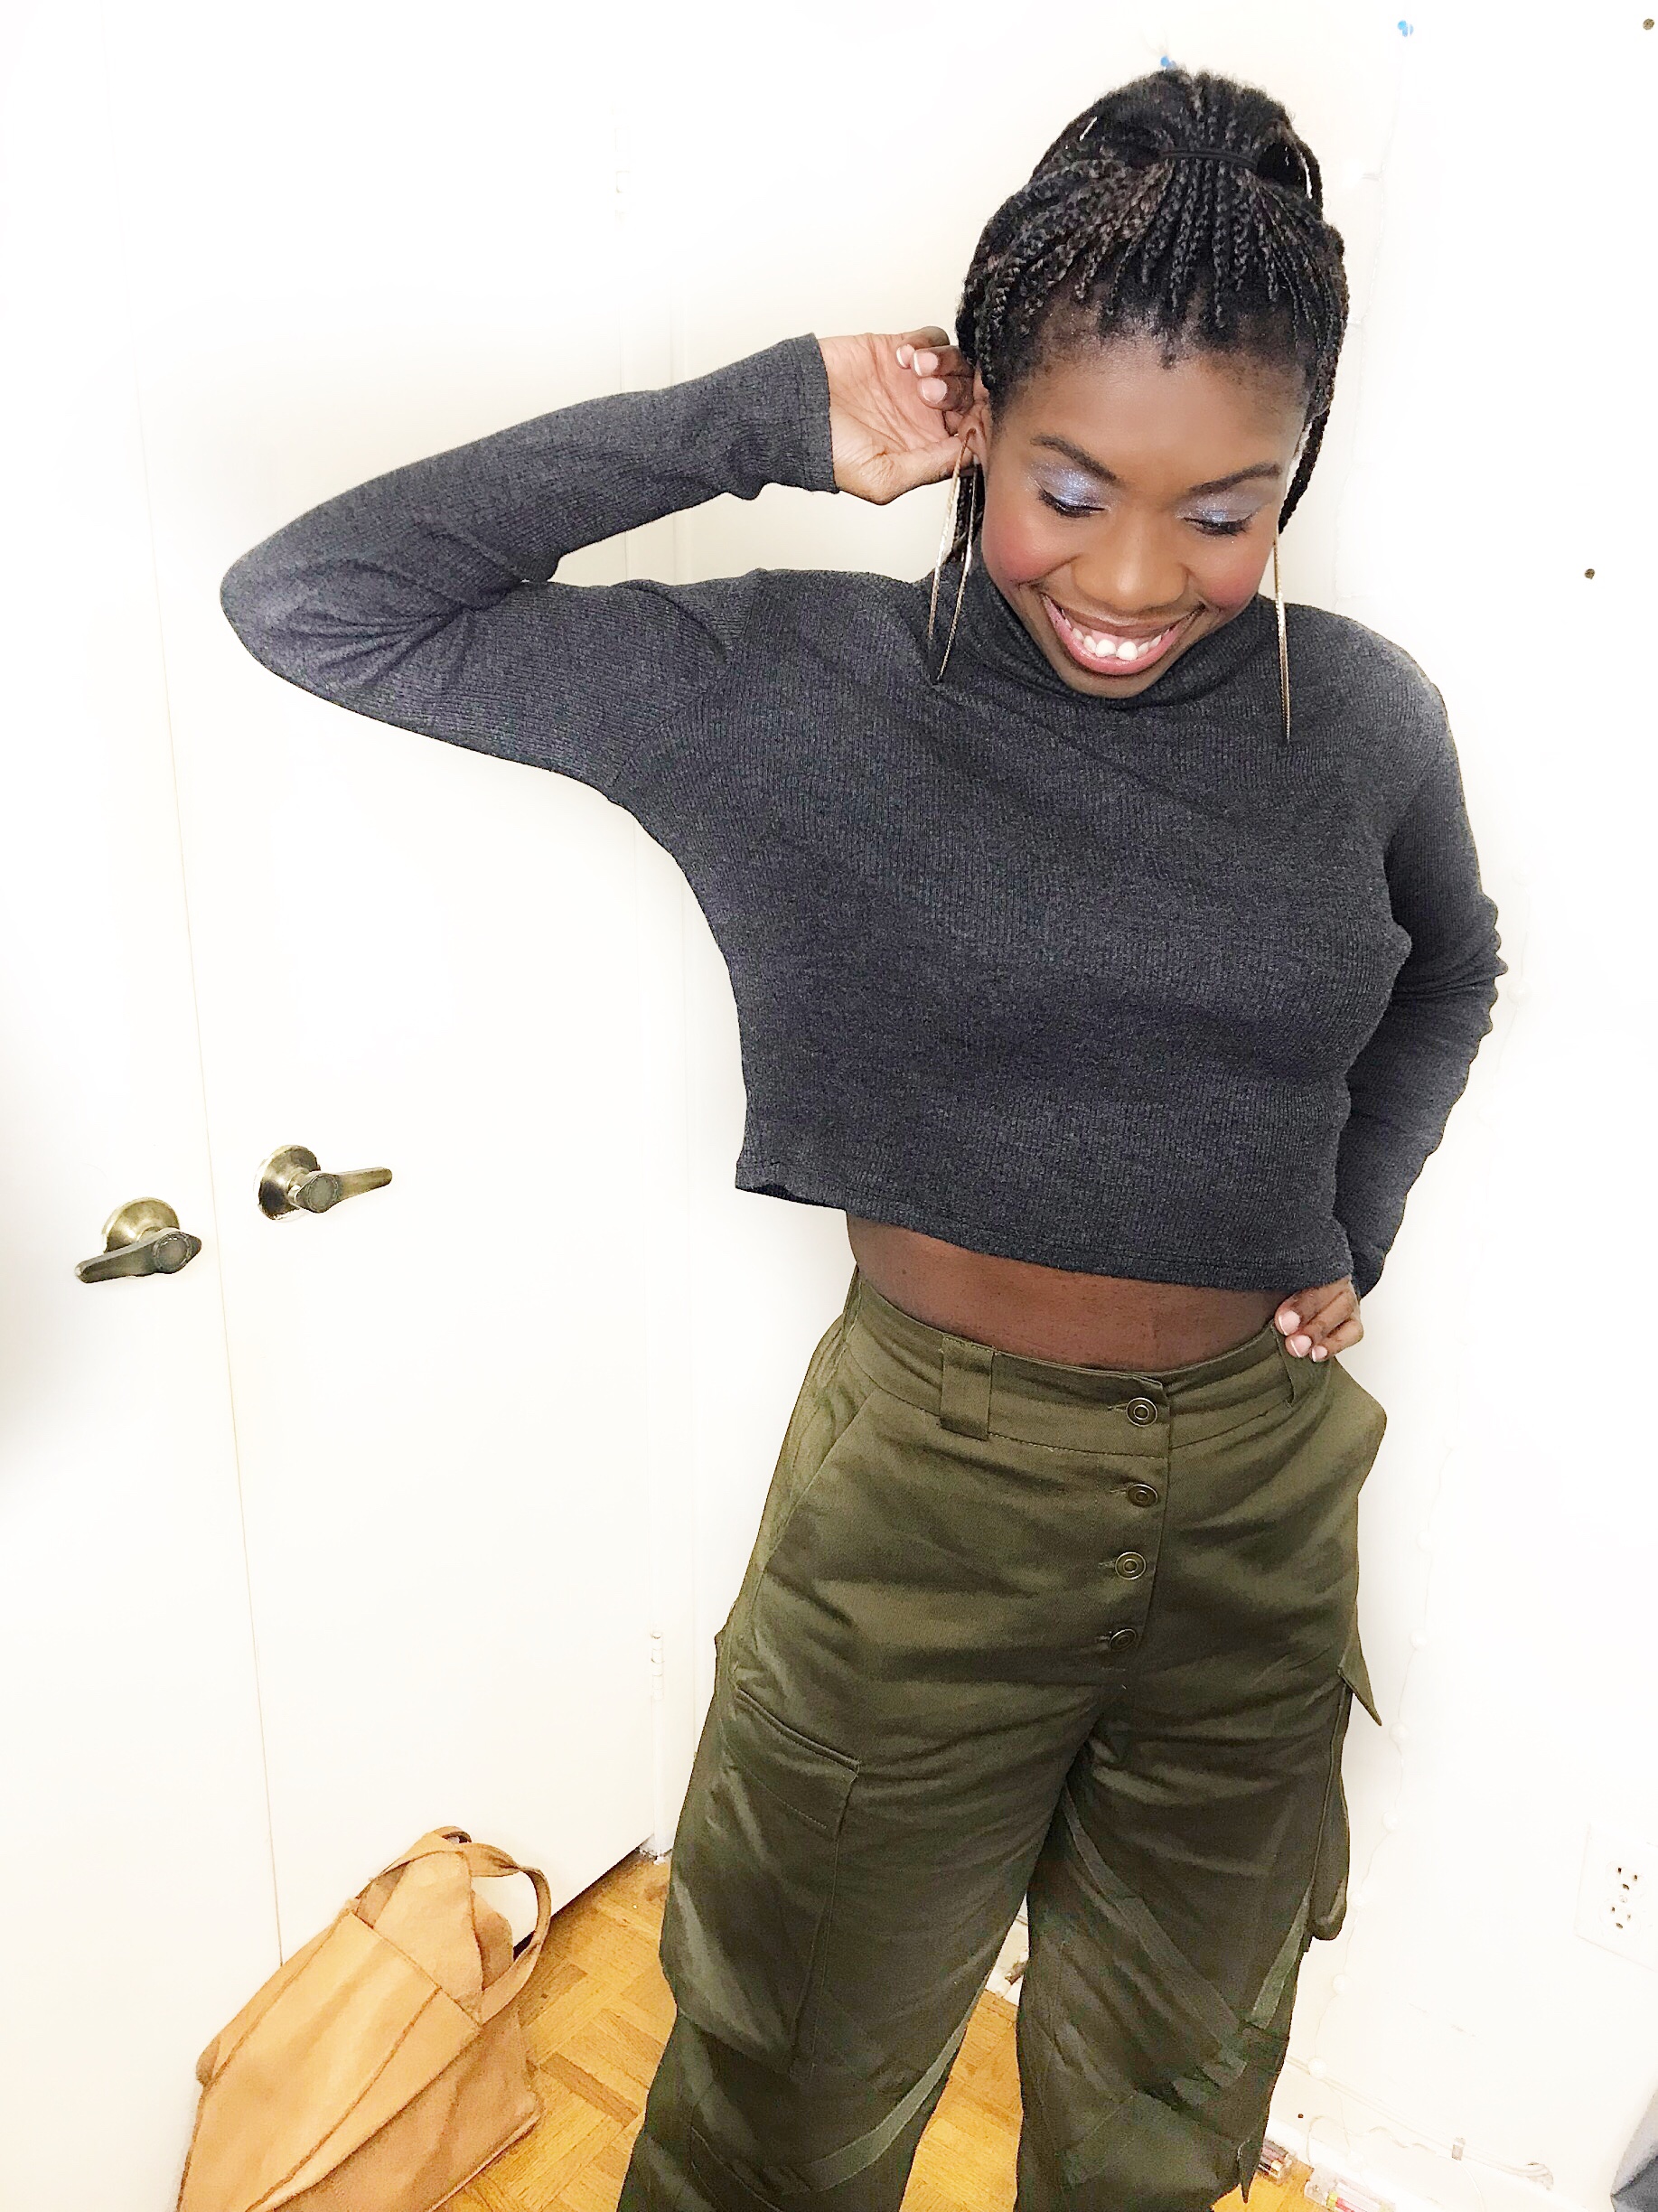 Telly smiles wearing her olive green combat pants